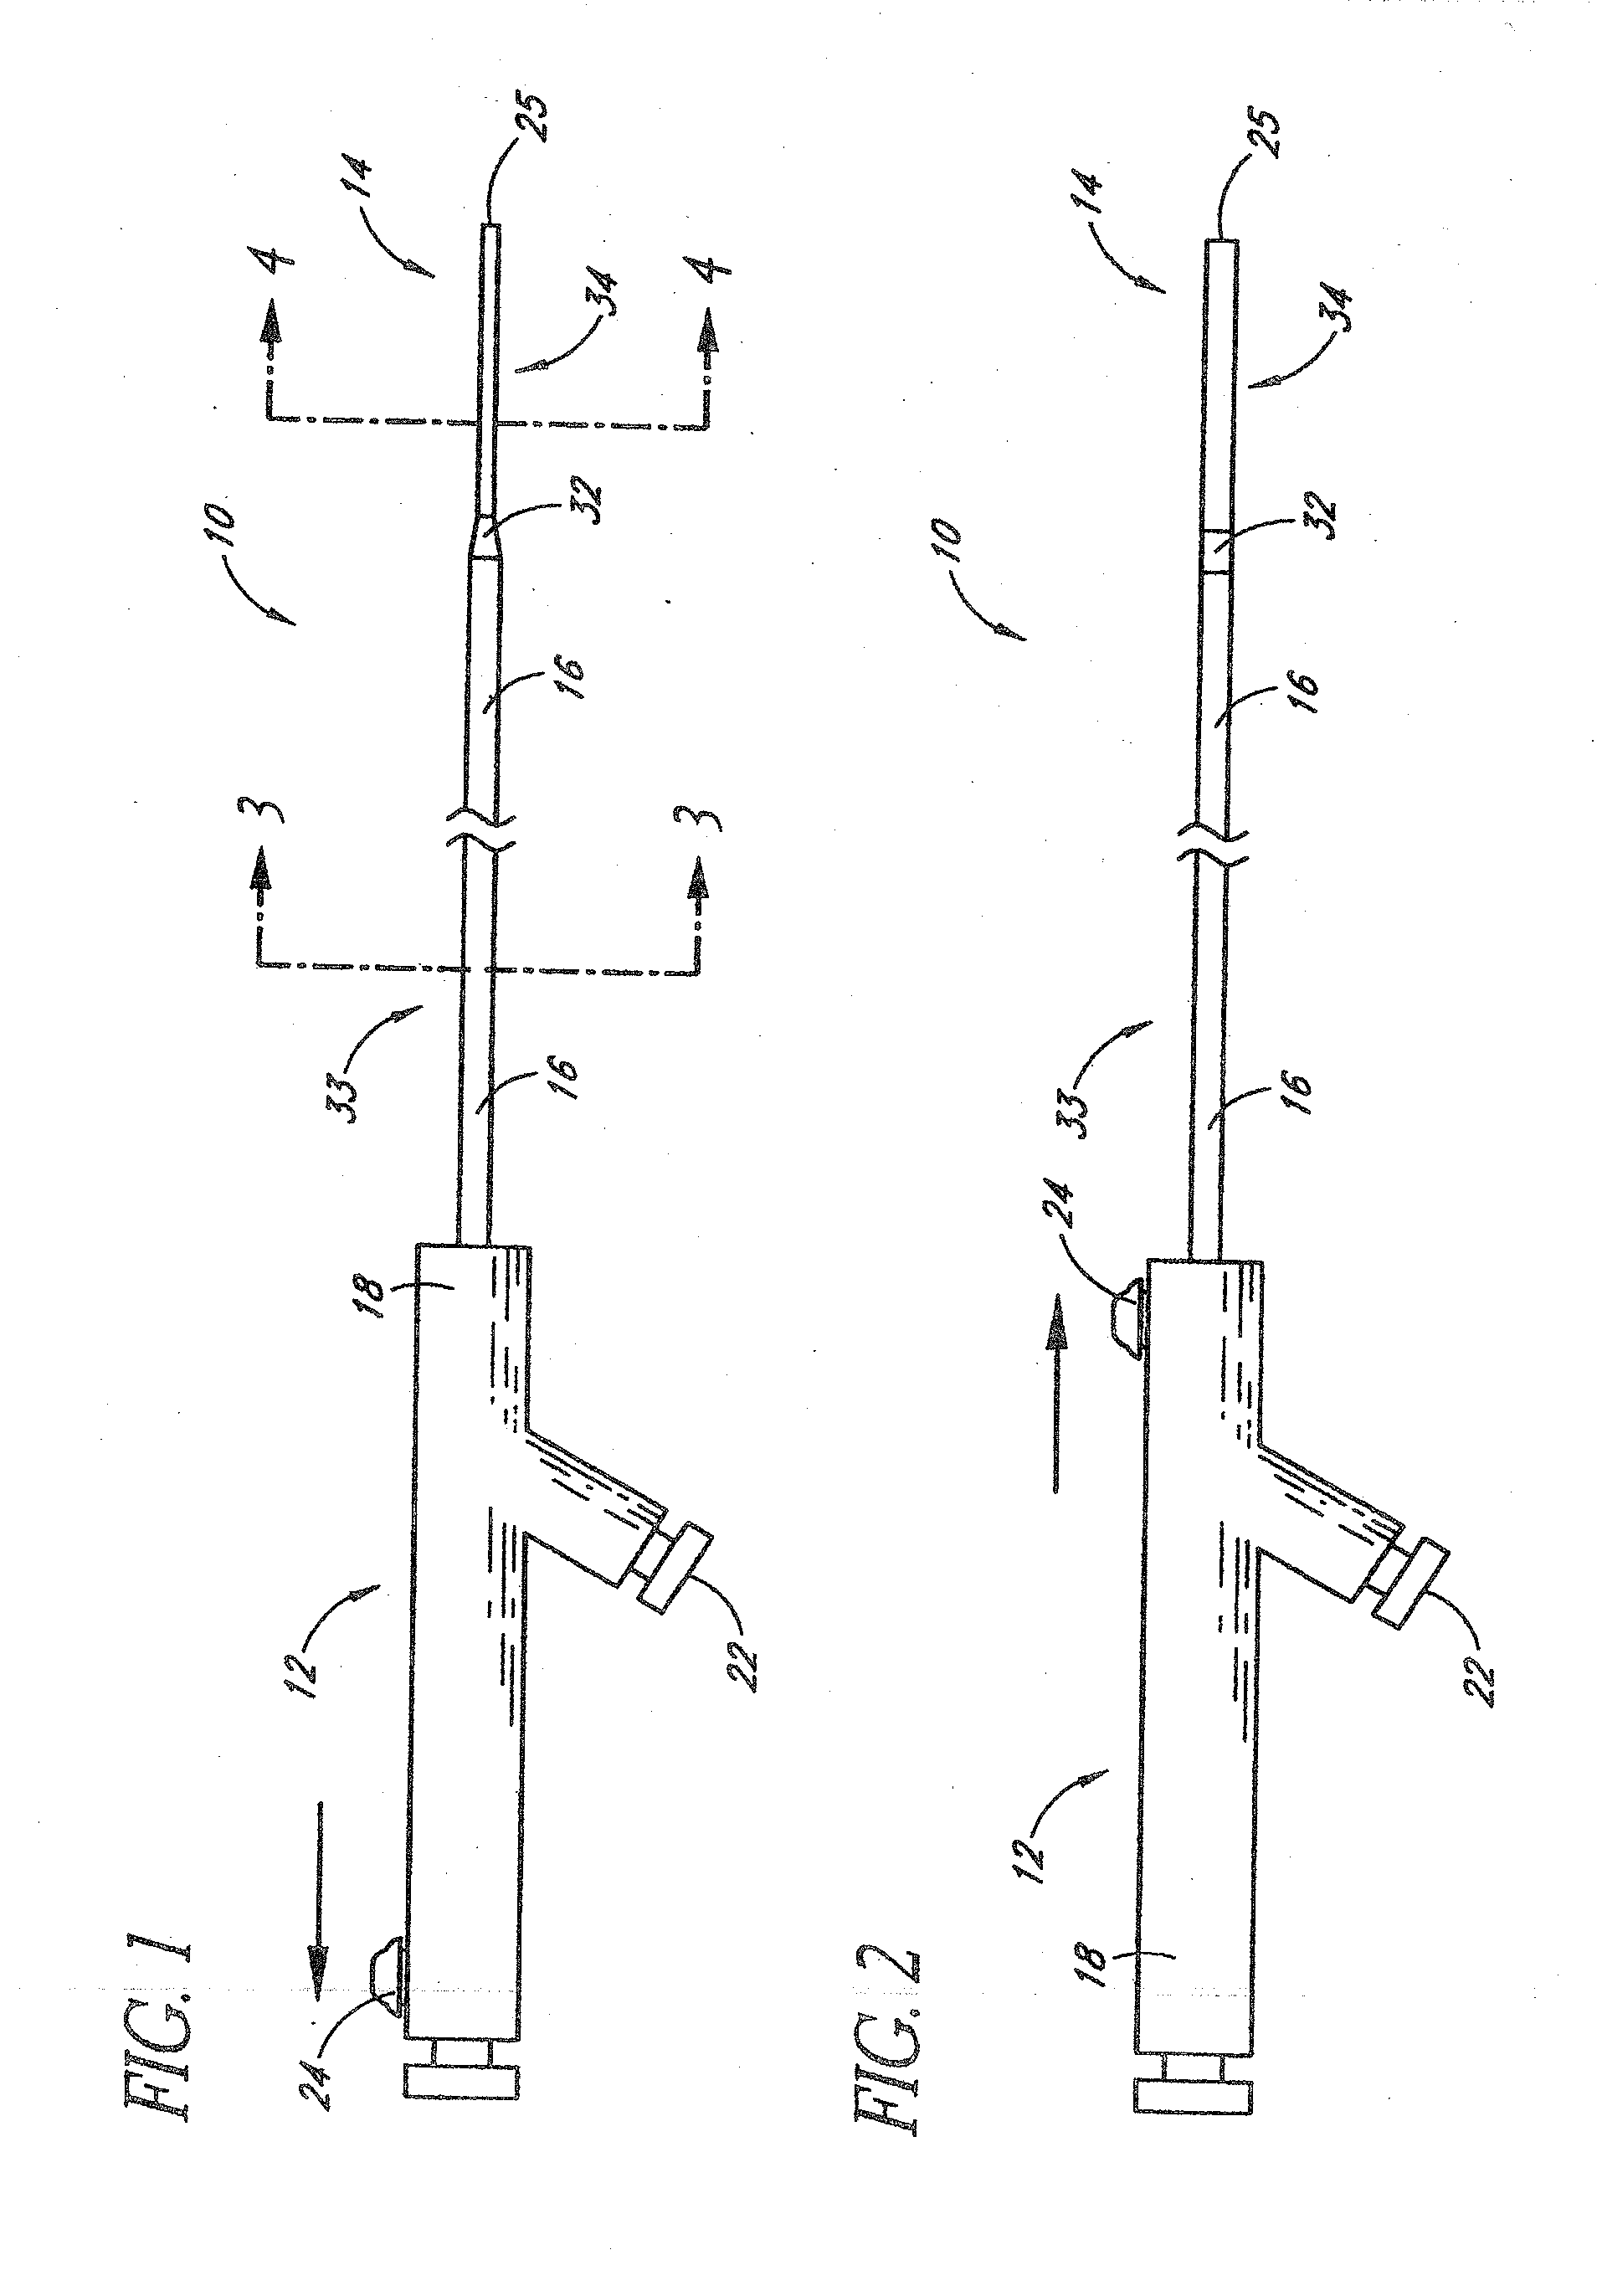 Systems And Methods For Removing Obstructive Matter From Body Lumens And Treating Vascular Defects